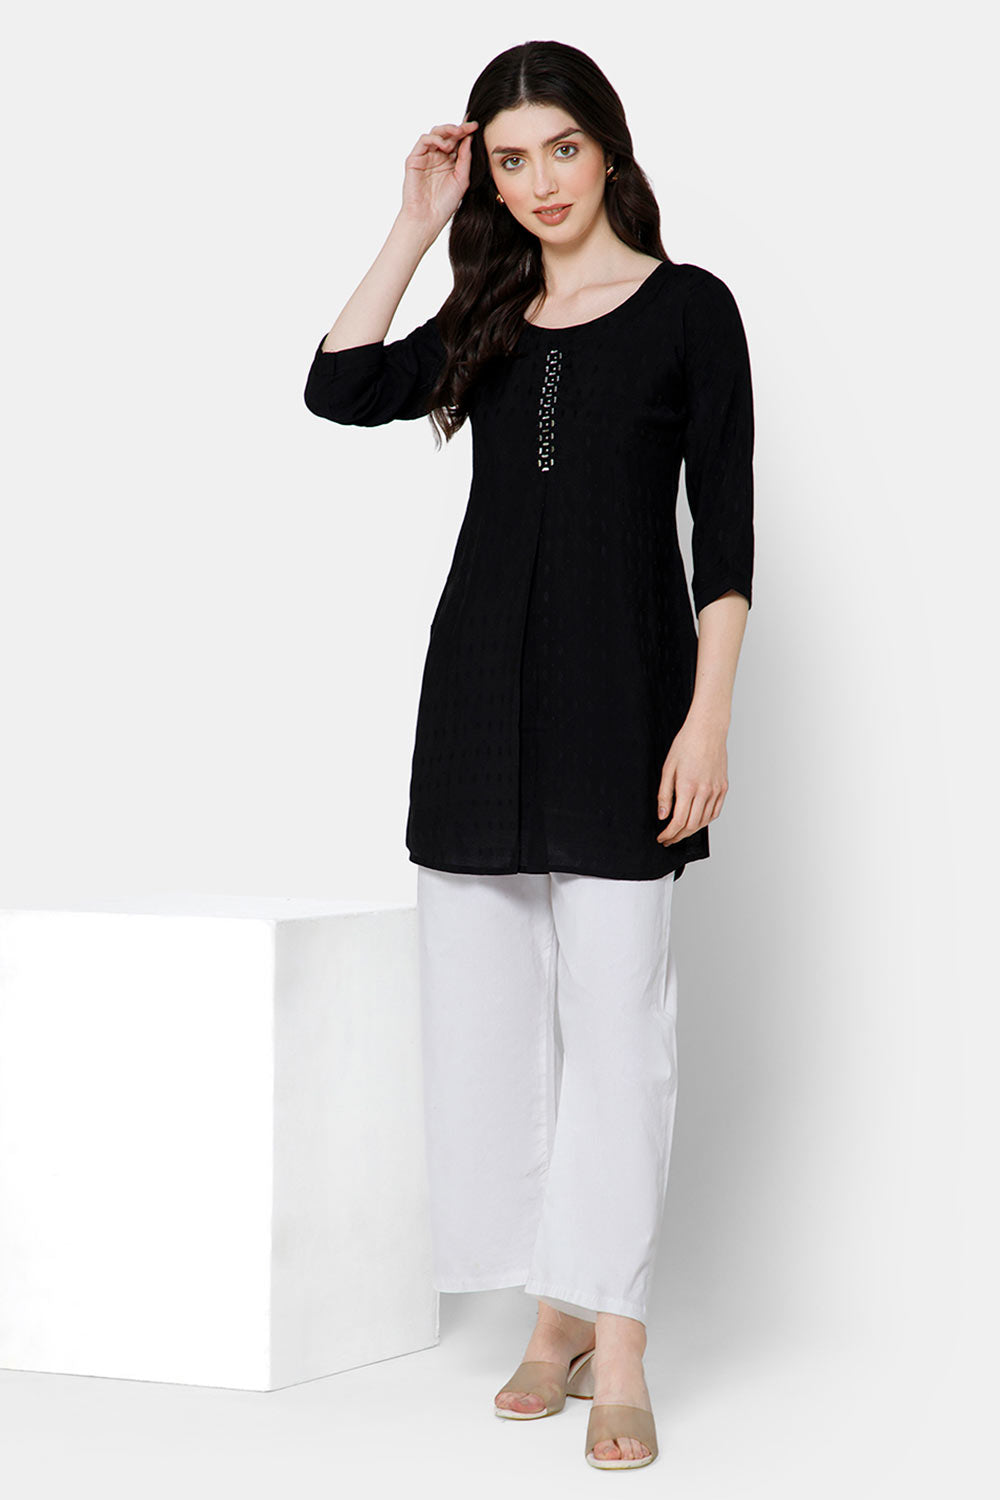 Mythri Women's Casual Tops with Mirror Work At The Center Front  - Black - E023